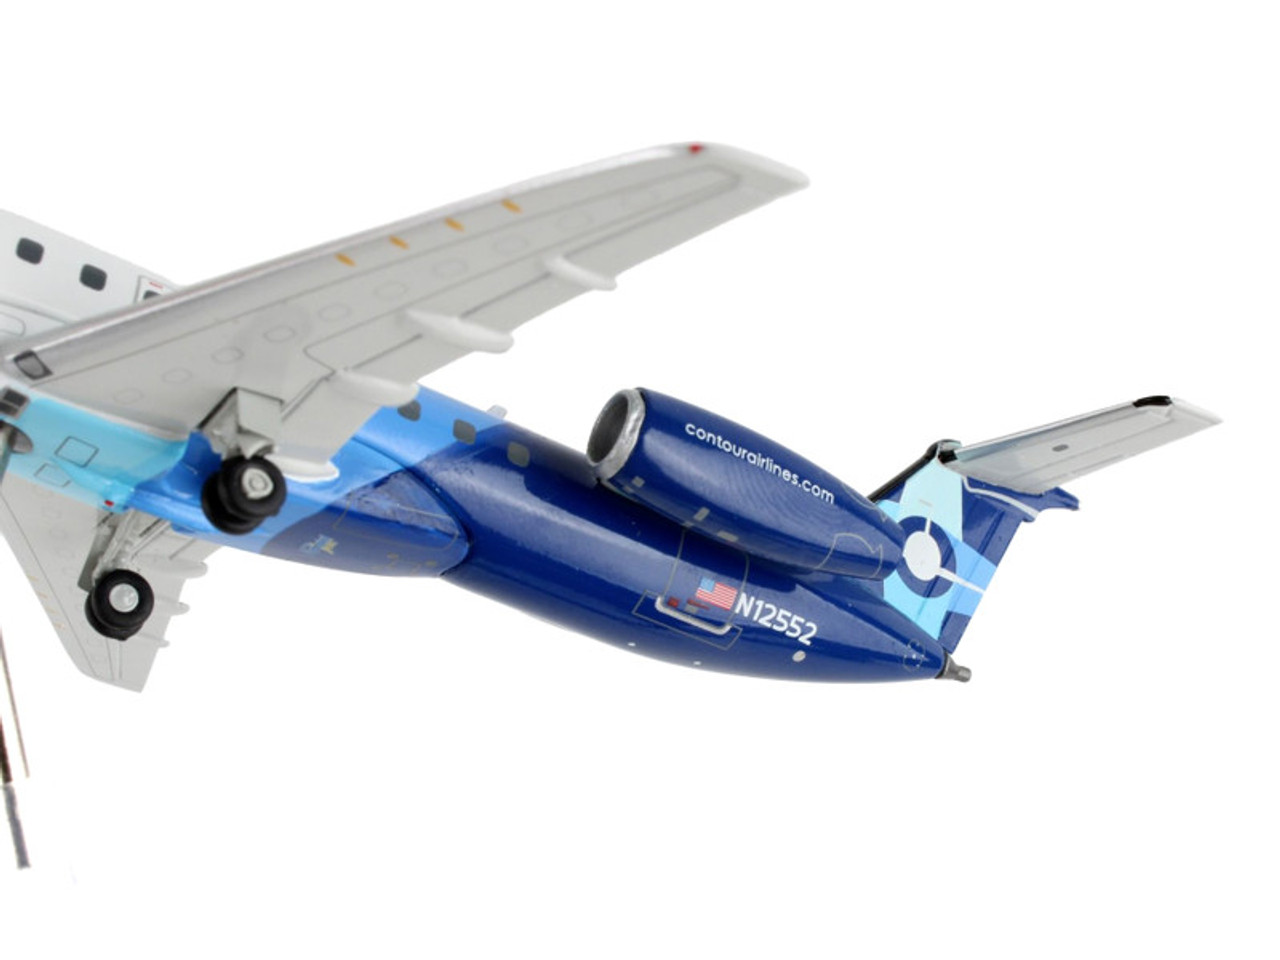 Embraer ERJ-145 Commercial Aircraft "Contour Airlines" White and Blue "Gemini 200" Series 1/200 Diecast Model Airplane by GeminiJets